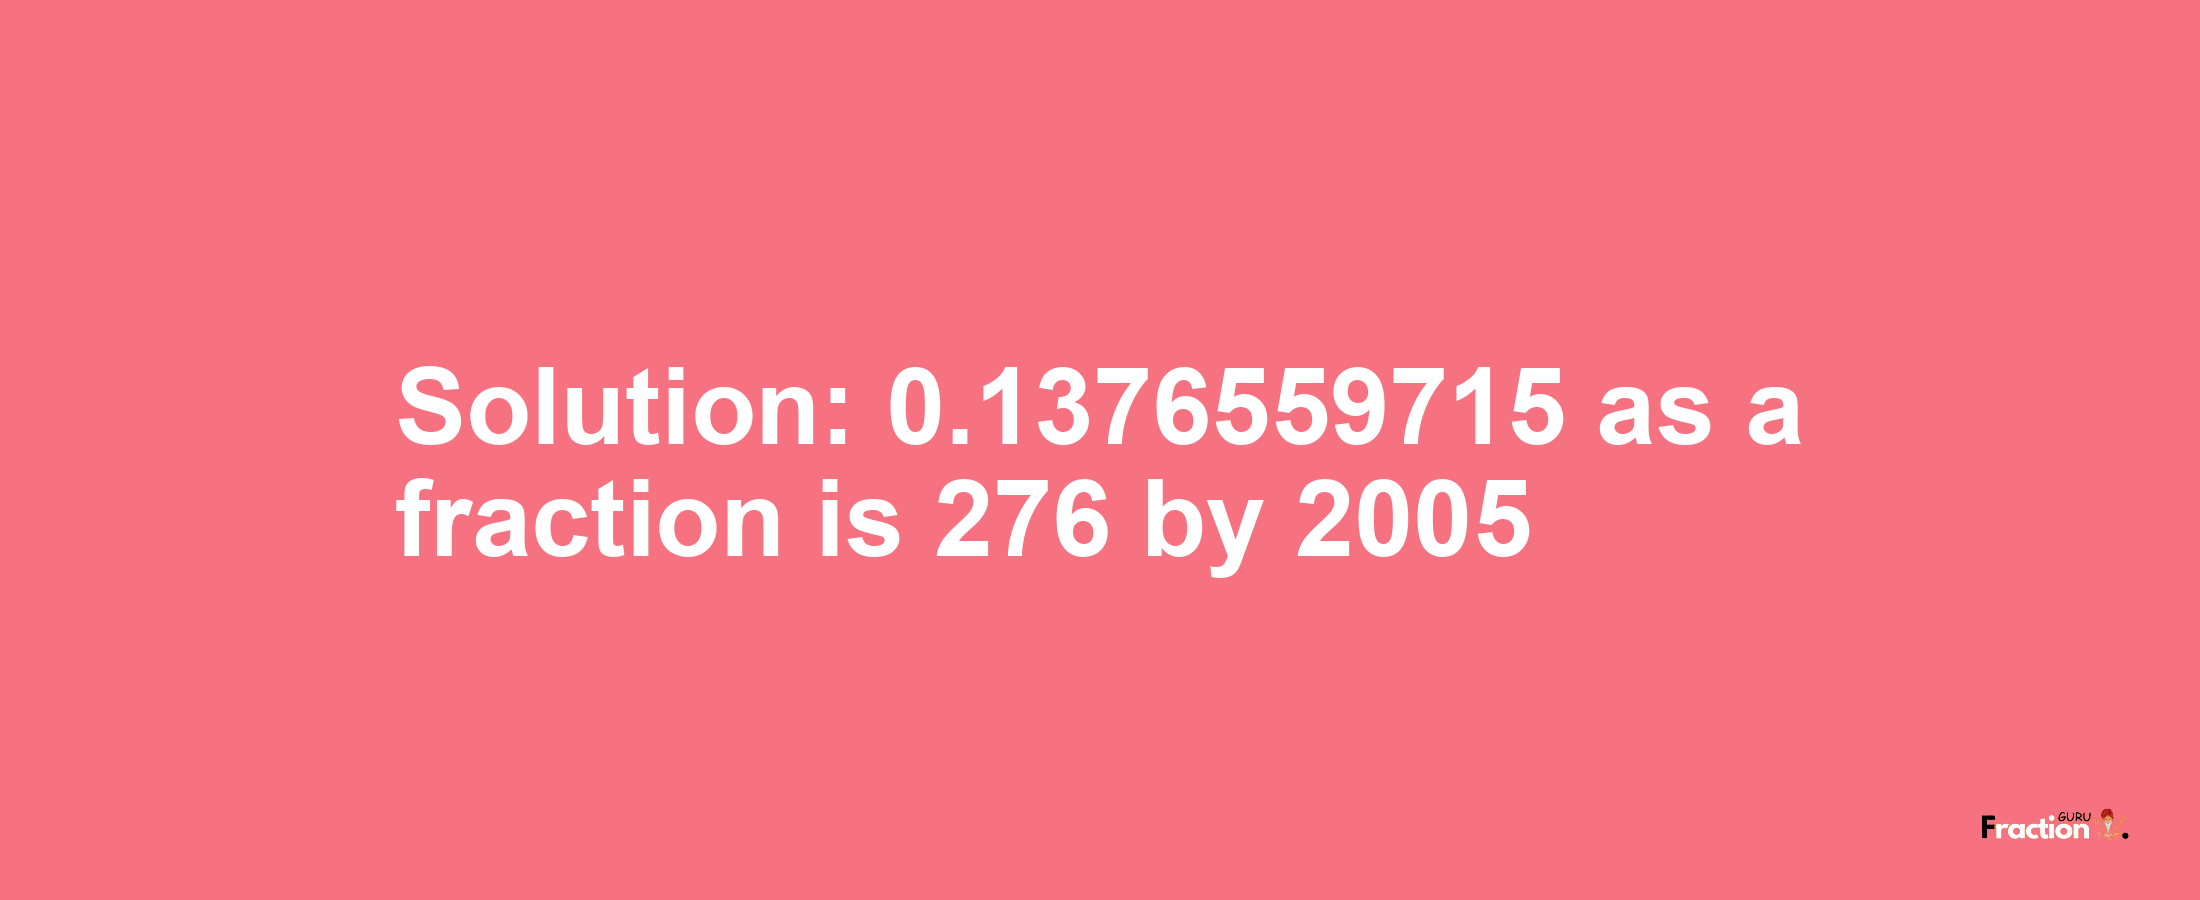 Solution:0.1376559715 as a fraction is 276/2005